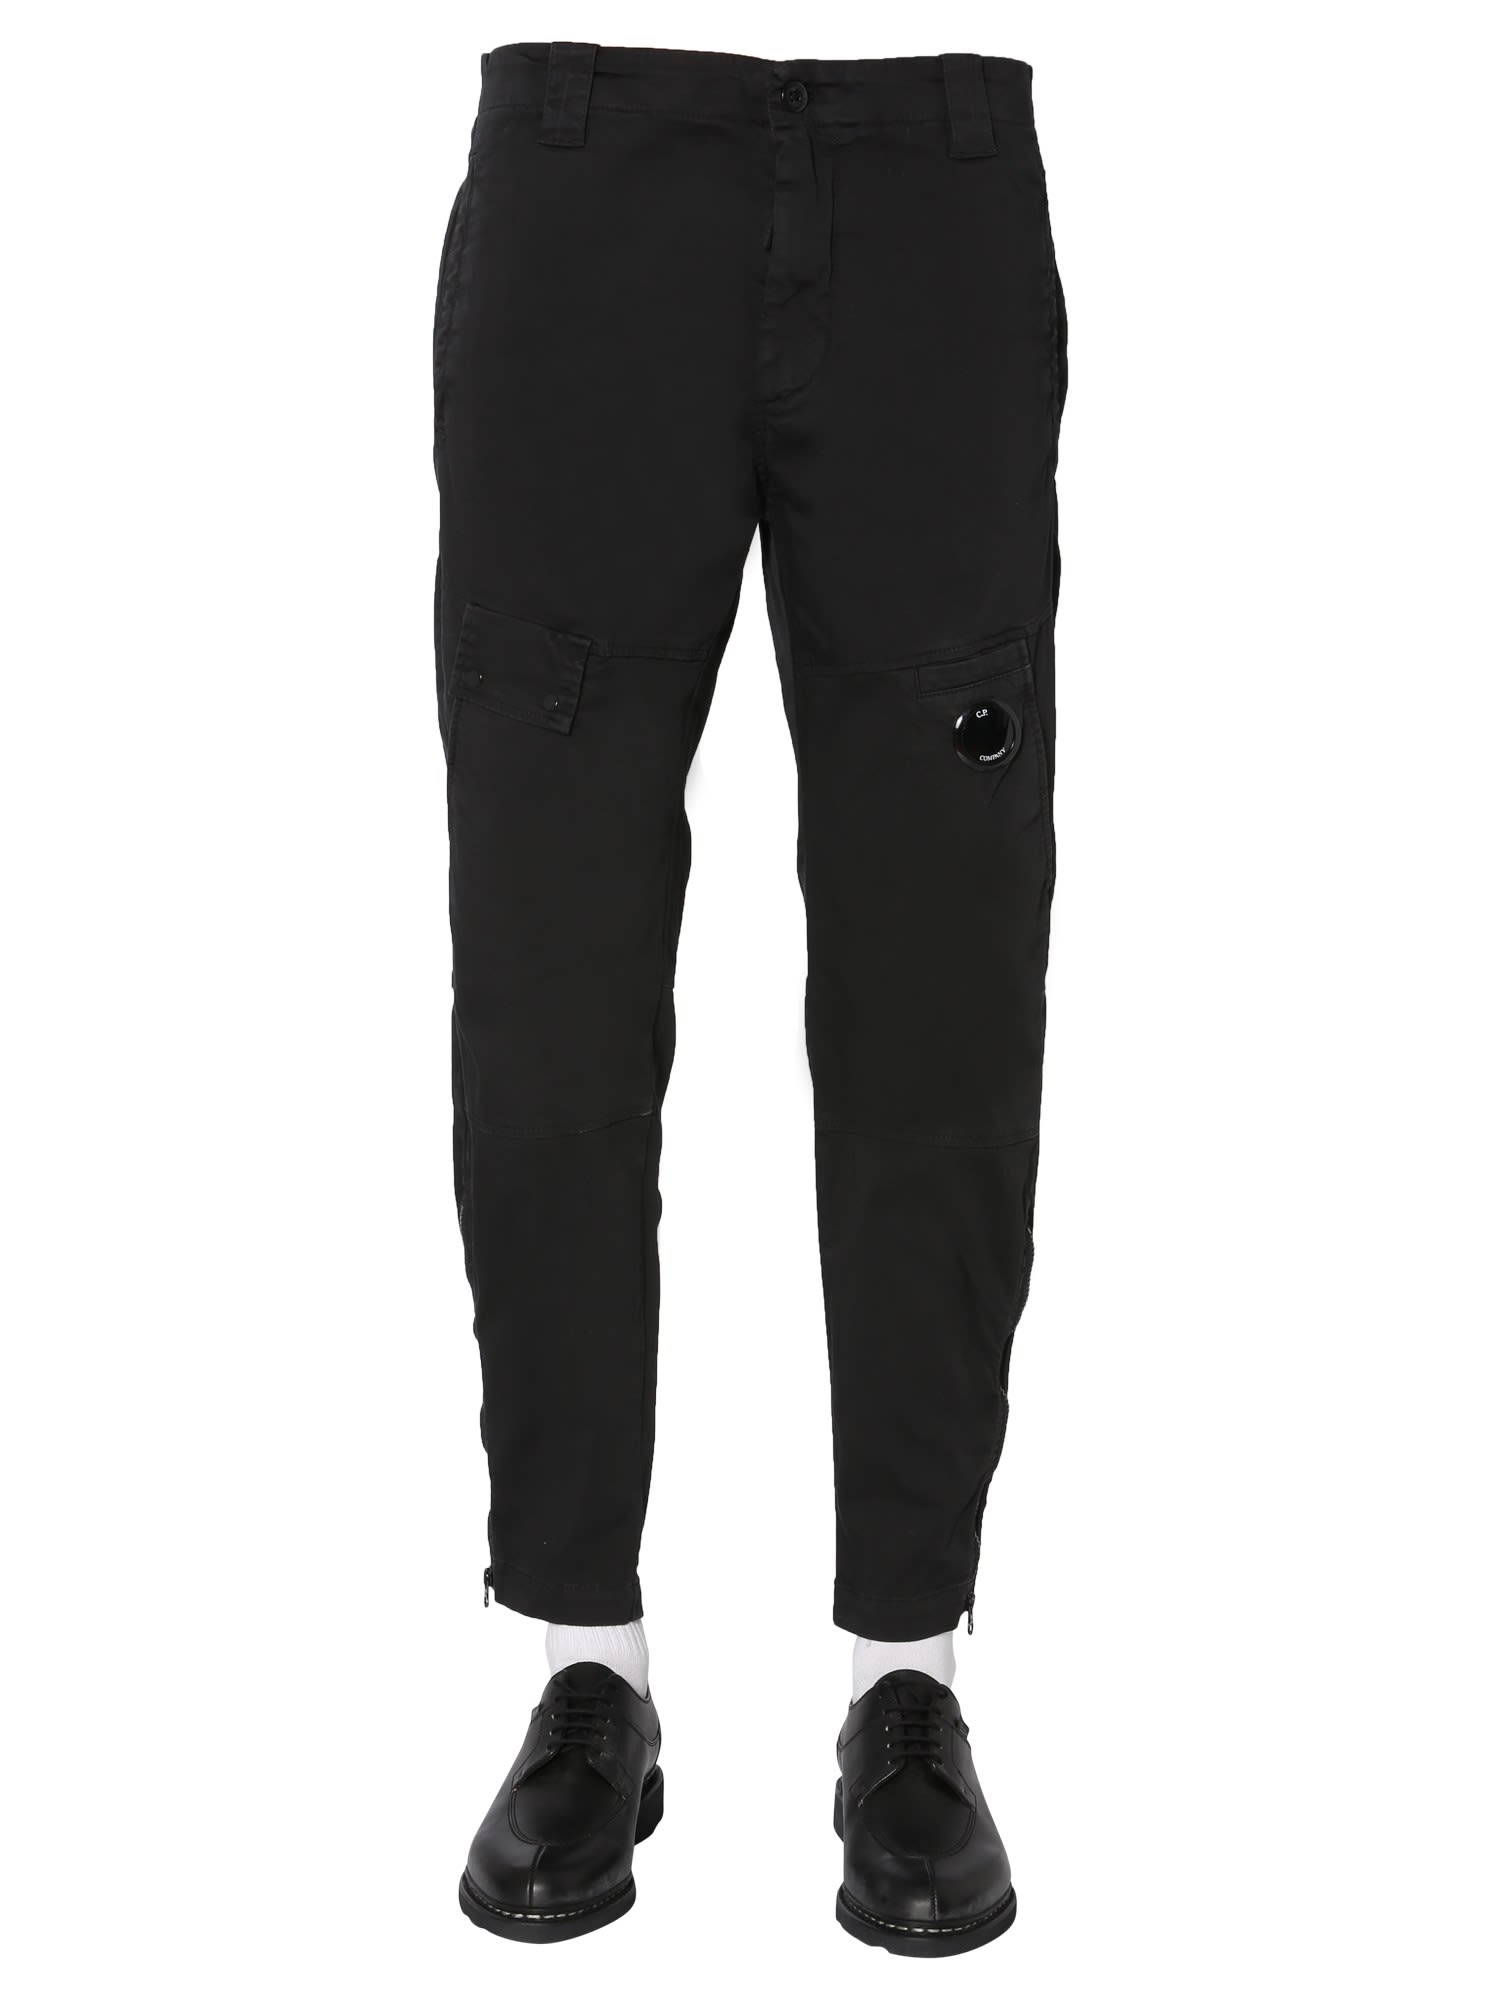 C.P. Company Pants With Iconic Lens